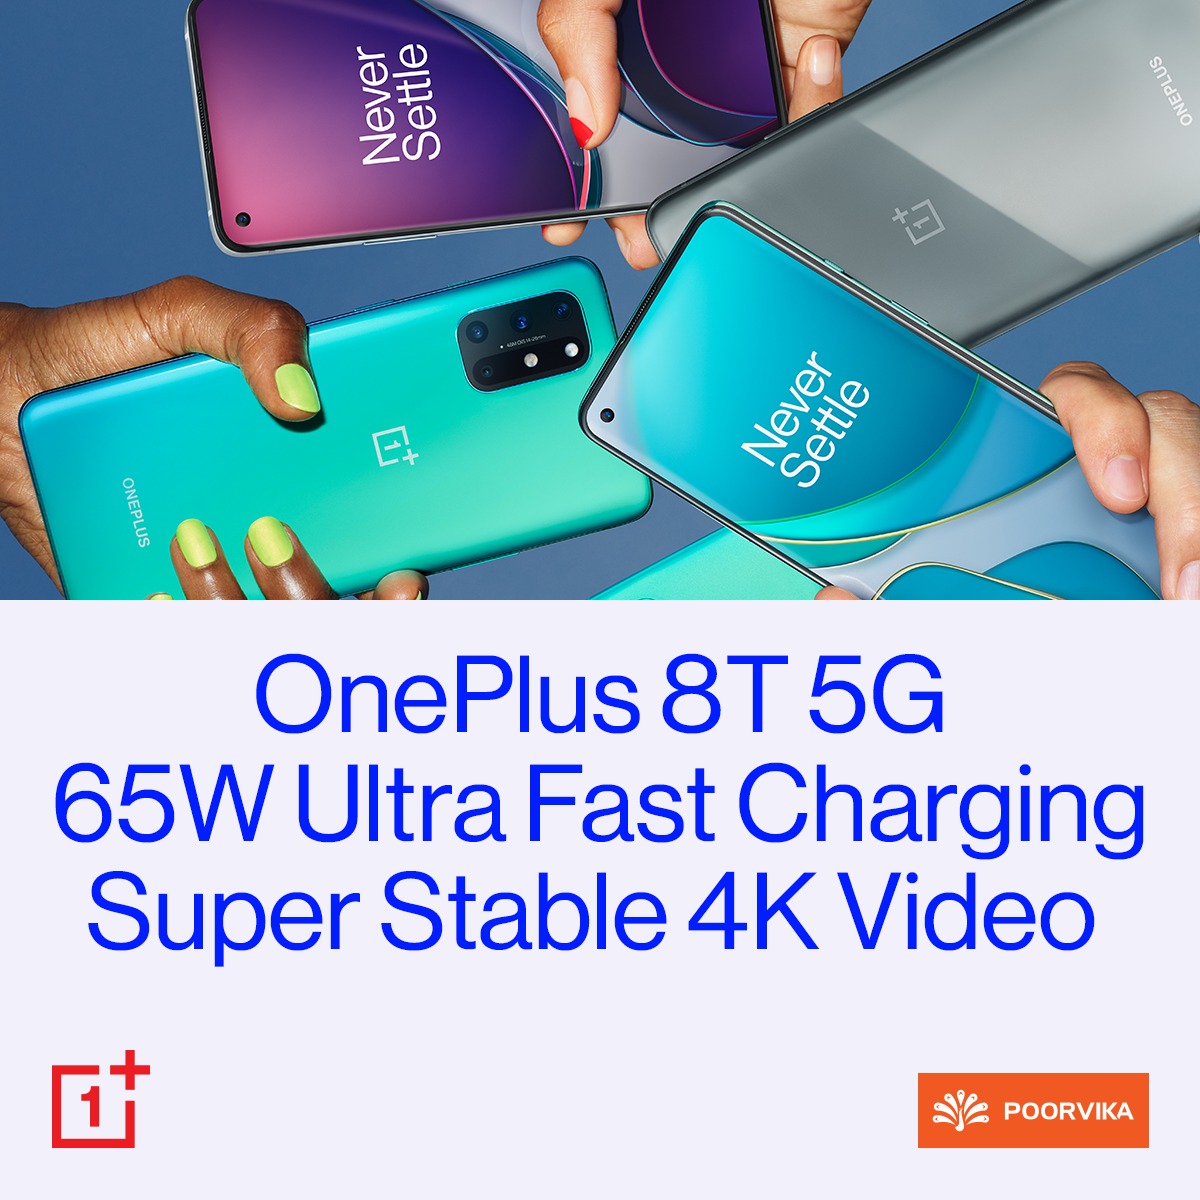 Get the latest and greatest #FlagshipKiller from #OnePlus, the #OnePlus8T at #Poorvika right now!

Experience true power of 65W #UltraFastCharging. Take your camera game to new heights with 48MP #QuadCamera.

Order Now: poorvika.me/OnePlus-8T

#poorvikamobiles #neversettle